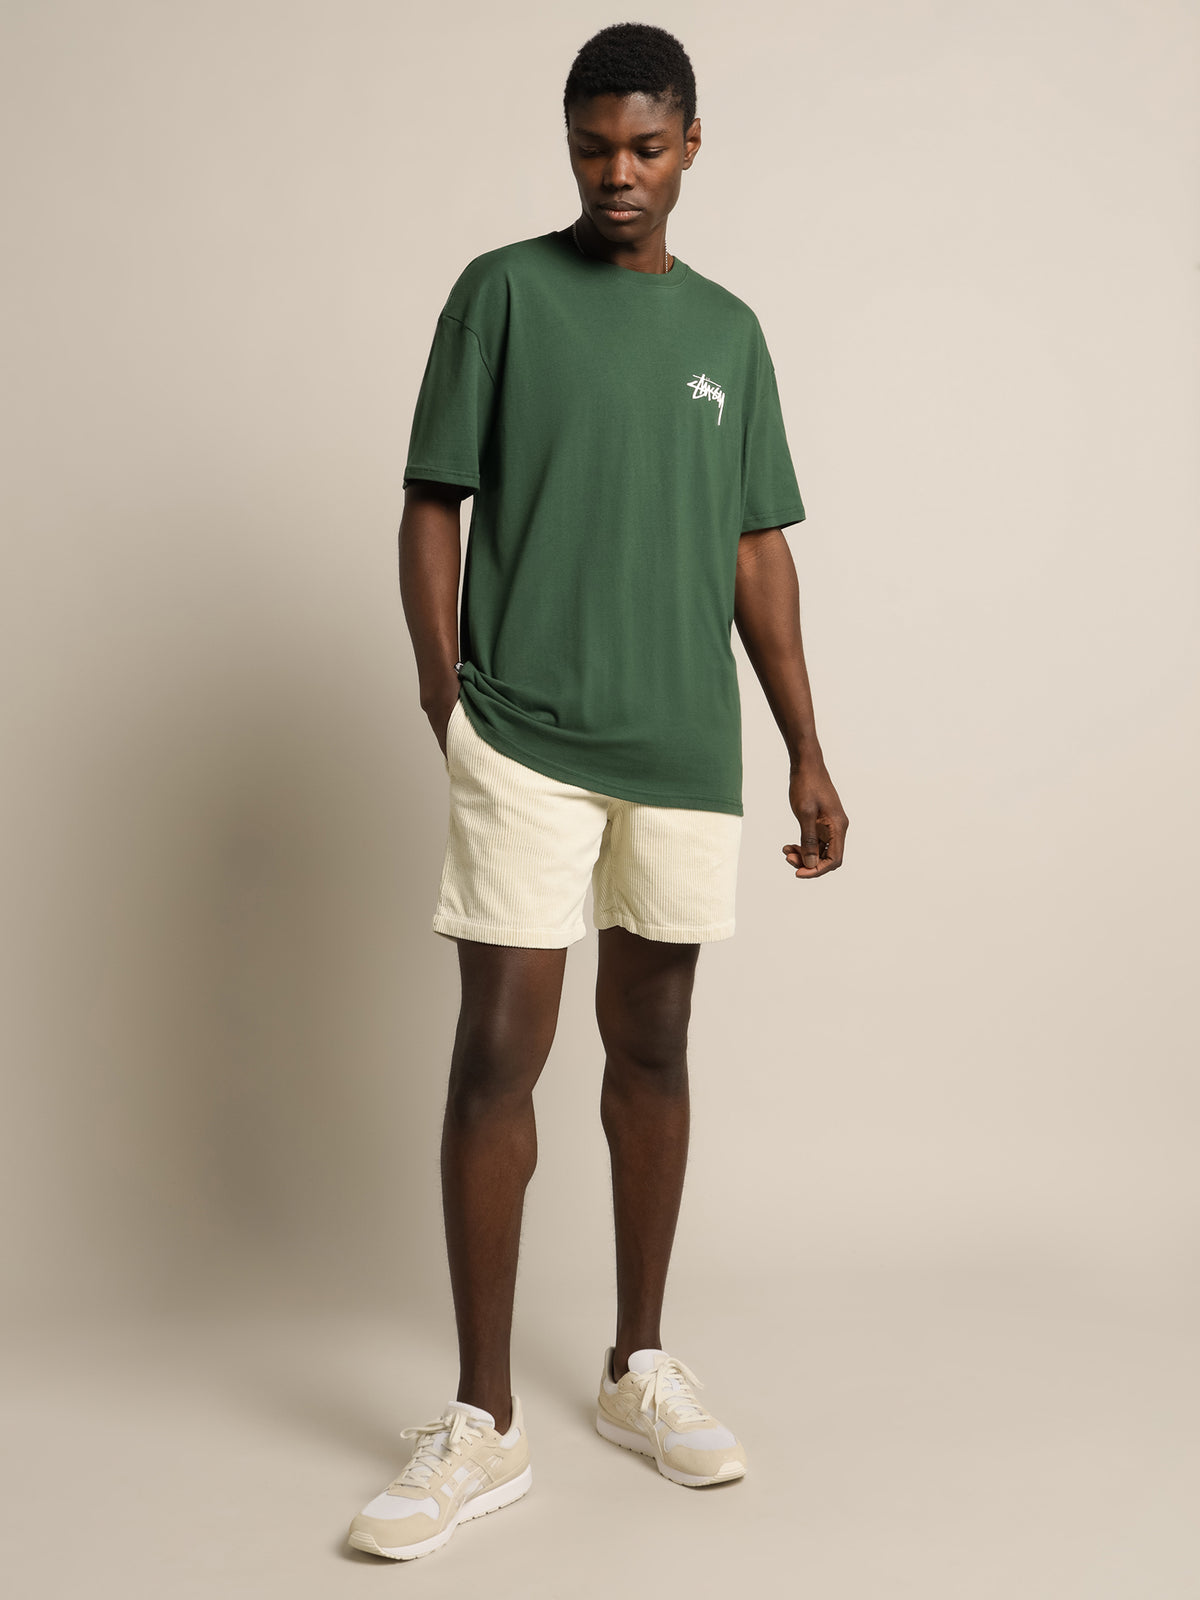 Your Friends 50/50 T-Shirt in Forest Green